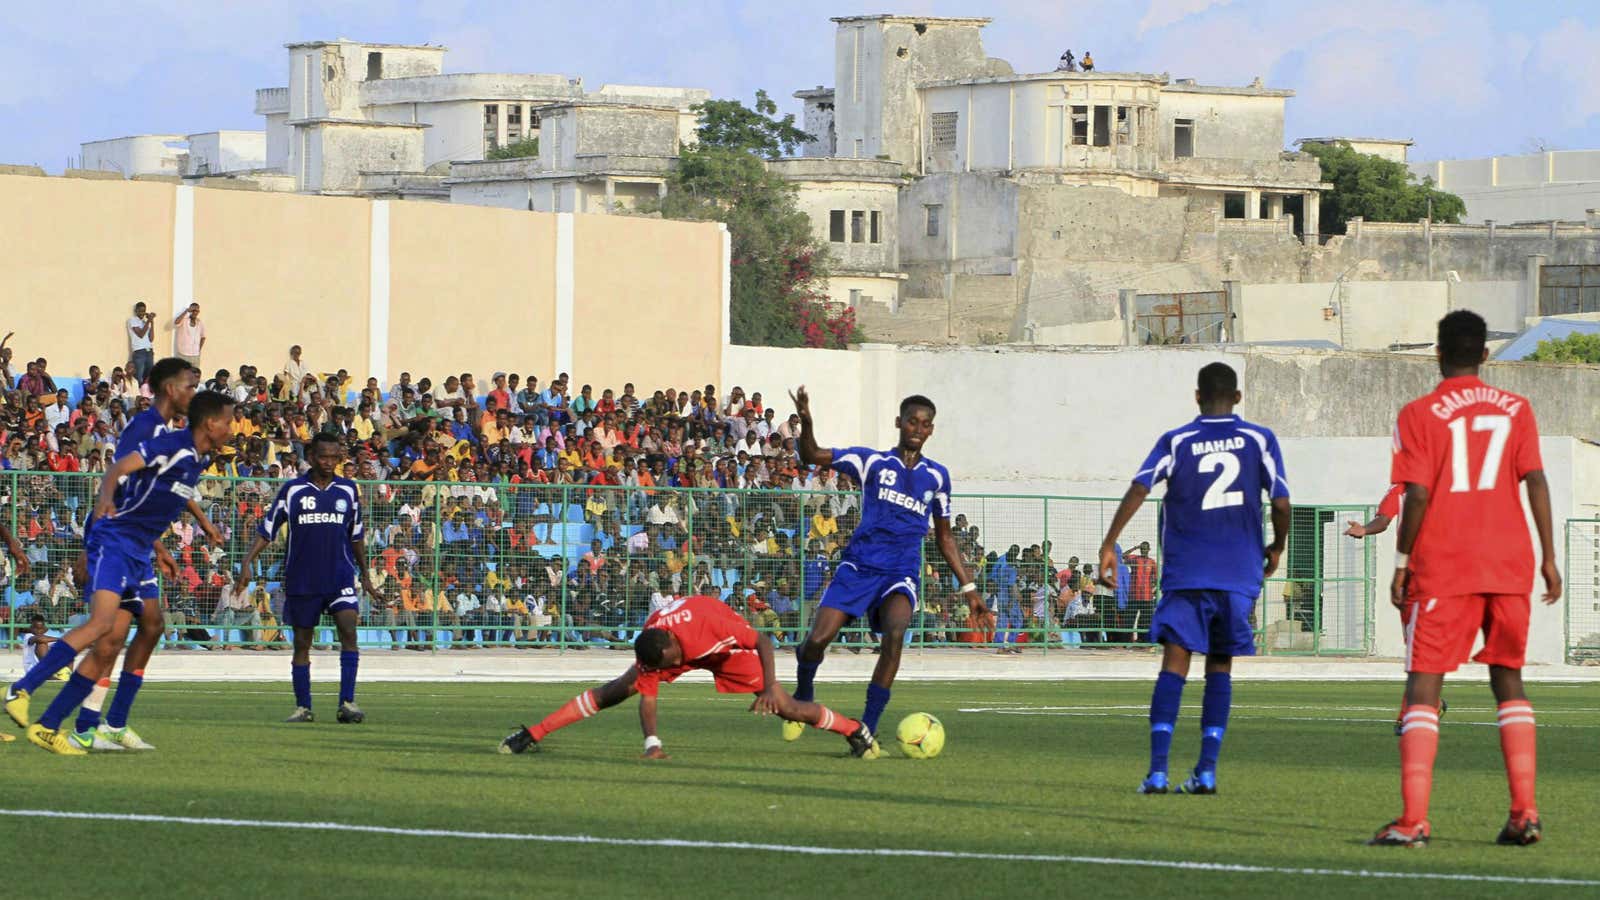 Mogadishu’s Banadir Stadium was rebuilt last year after being destroyed in 2009 during Al-Shabaab clashes with government forces.